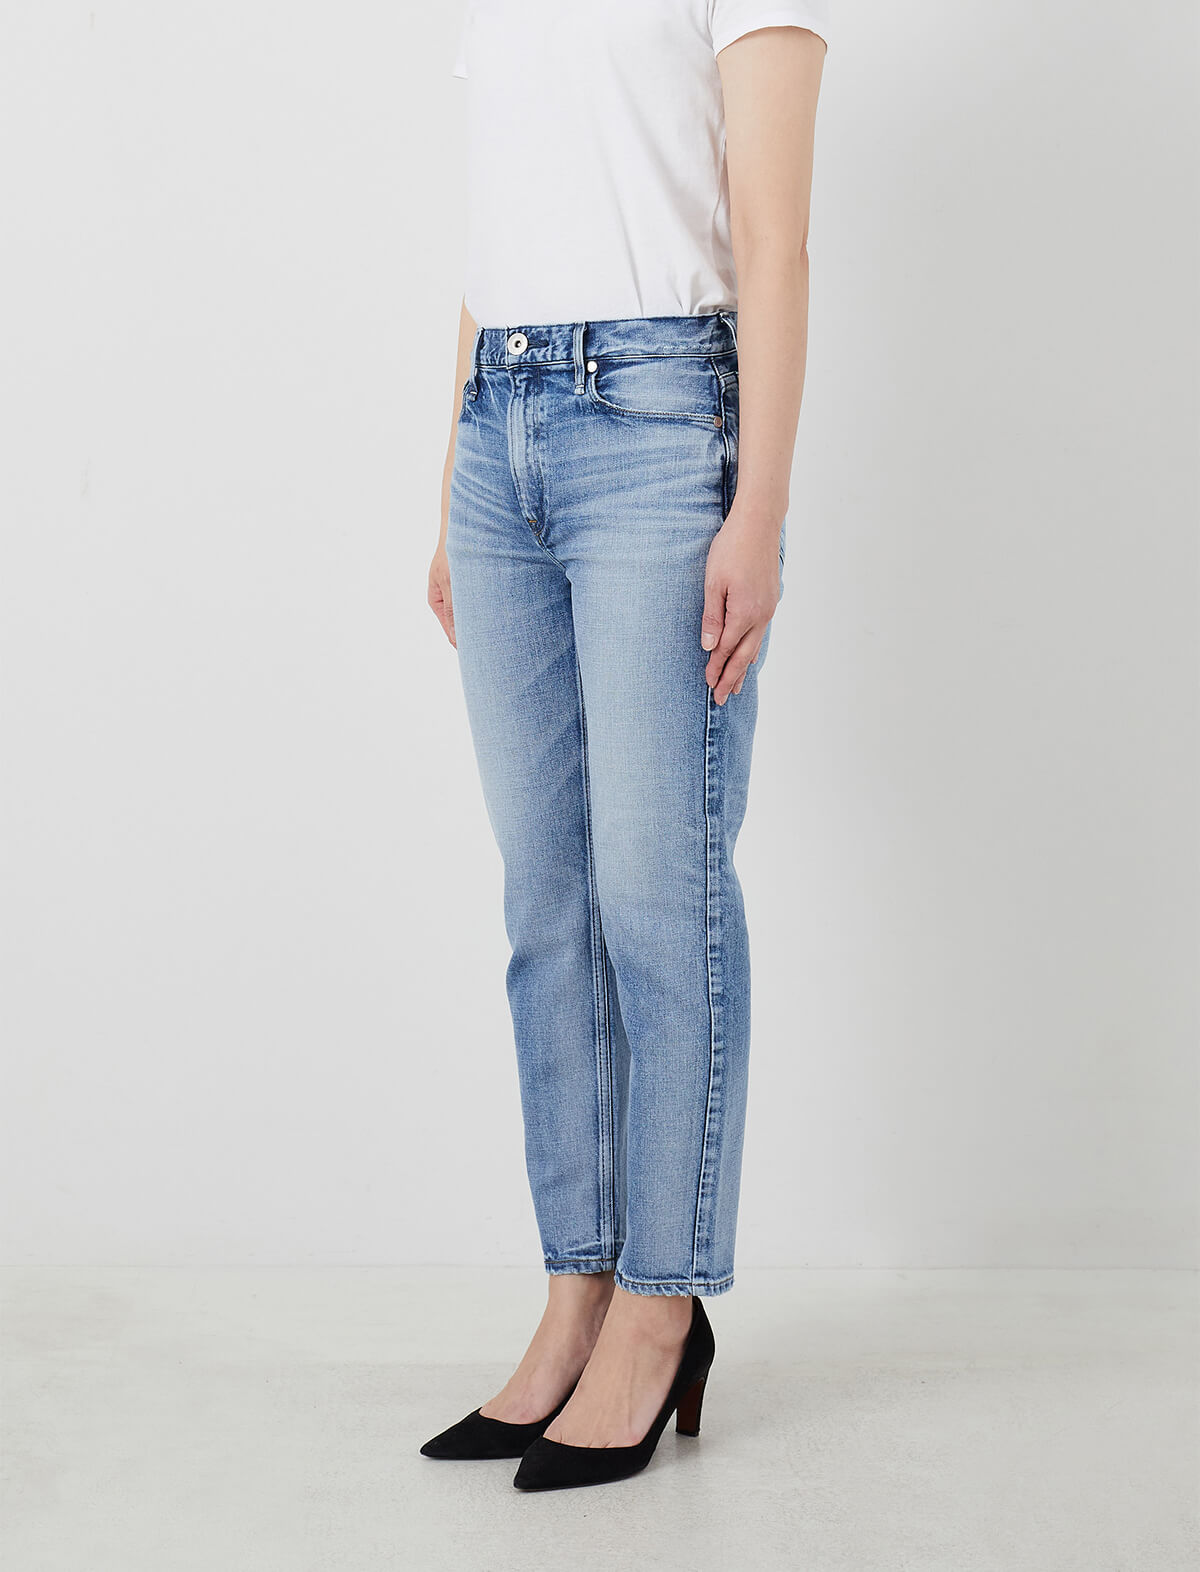 UPPER HIGHTS The Lady Midrise Slim Tapered Jeans in Sun